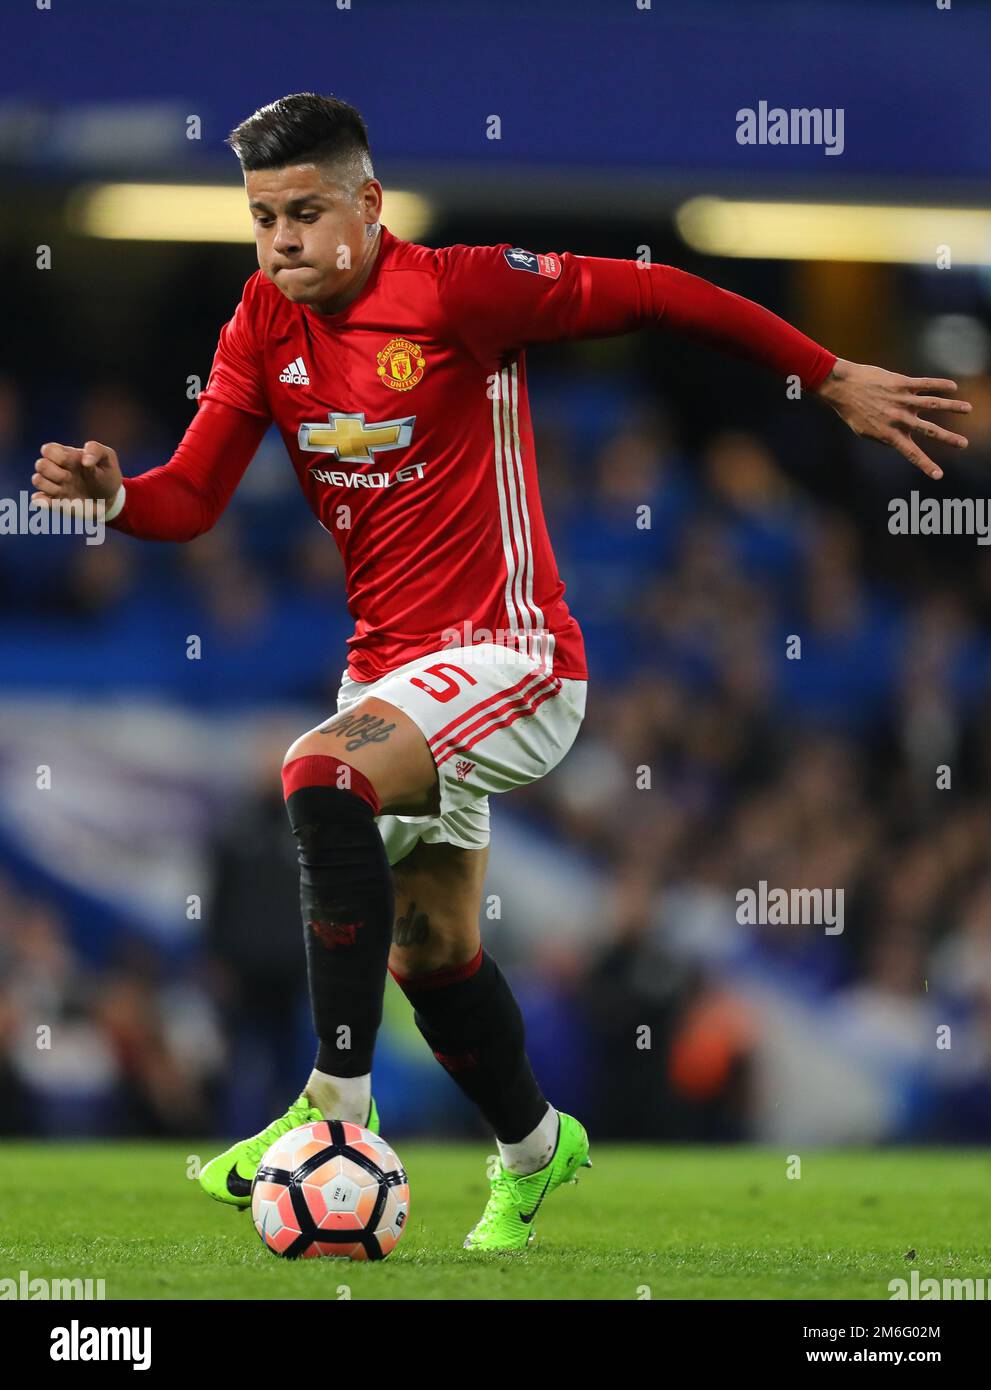 Marcos Rojo of Manchester United - Chelsea v Manchester United, FA Cup Quarter-final, Stamford Bridge, London - 13th March 2017. Stock Photo